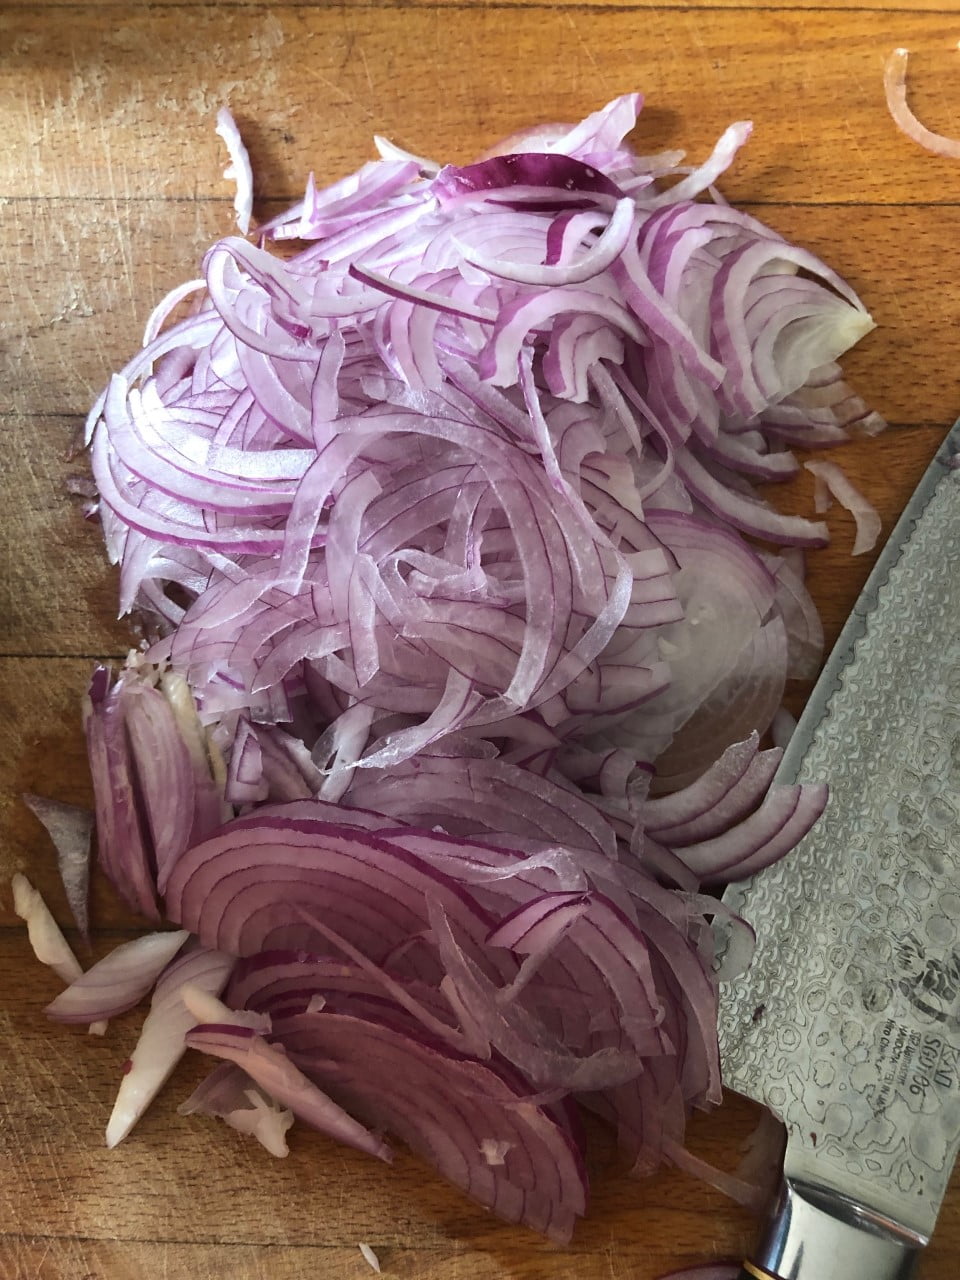 Two Ways to Have Pickled/Marinated Onions